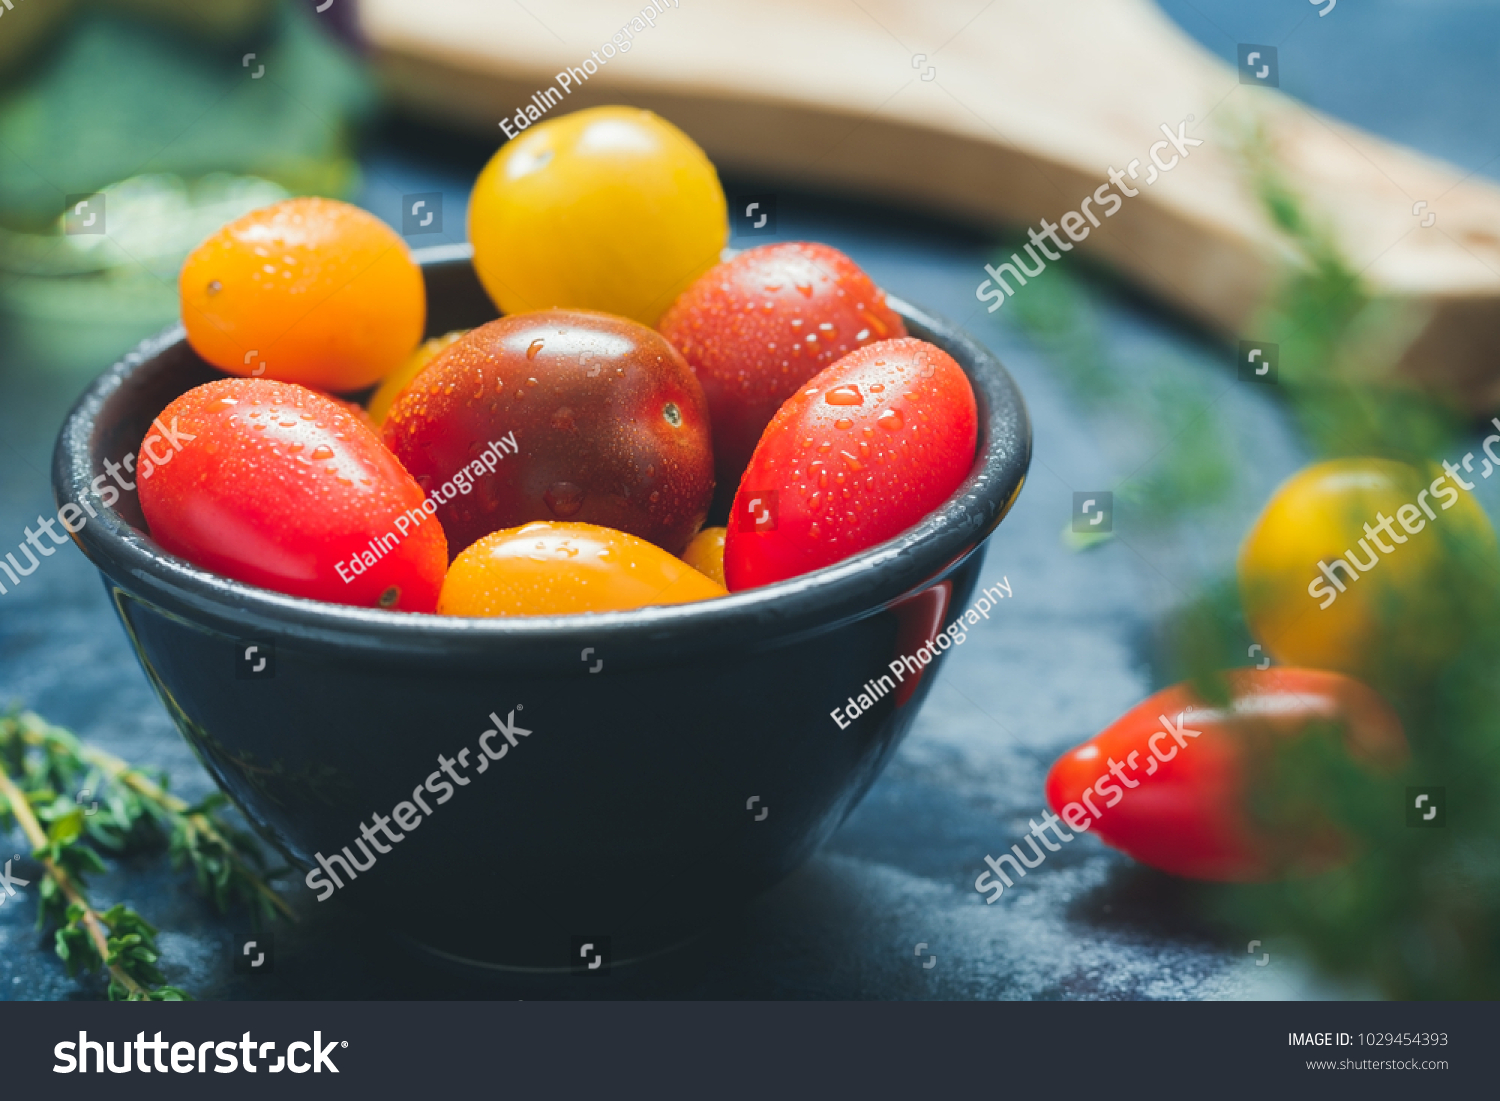 Colorful cherry tomatoes in a black bowl in a kitchen. #1029454393